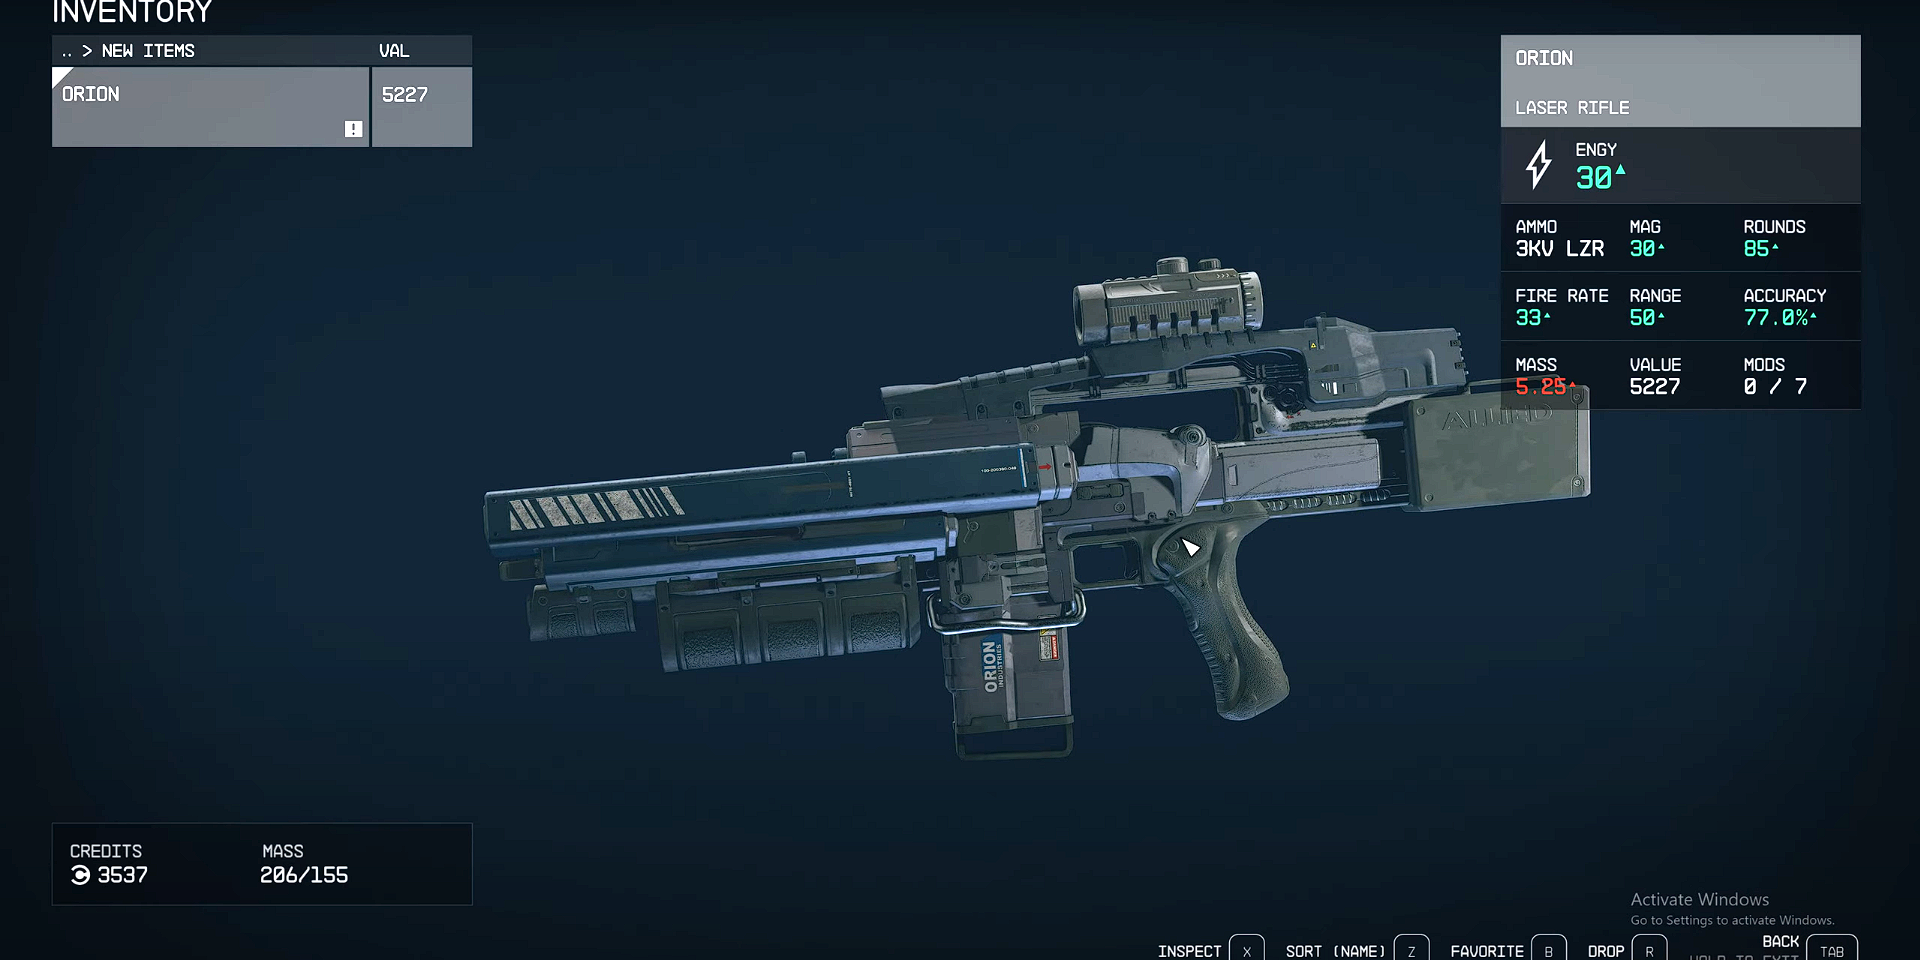 Orion Laser Rifle in the Inventory menu in Starfield